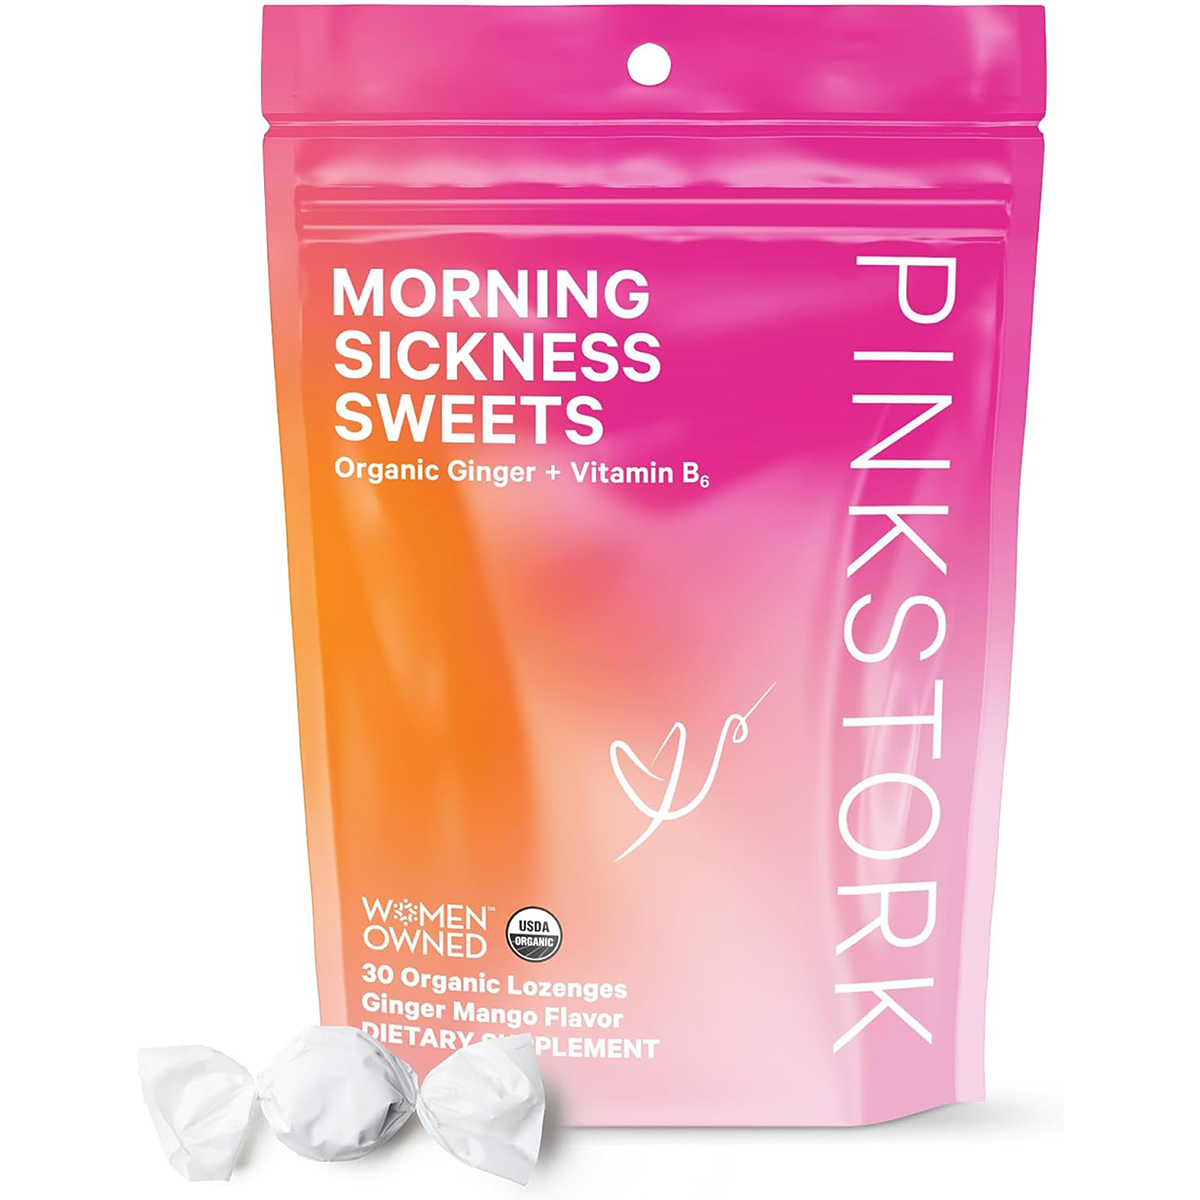 Morning Sickness Sweets